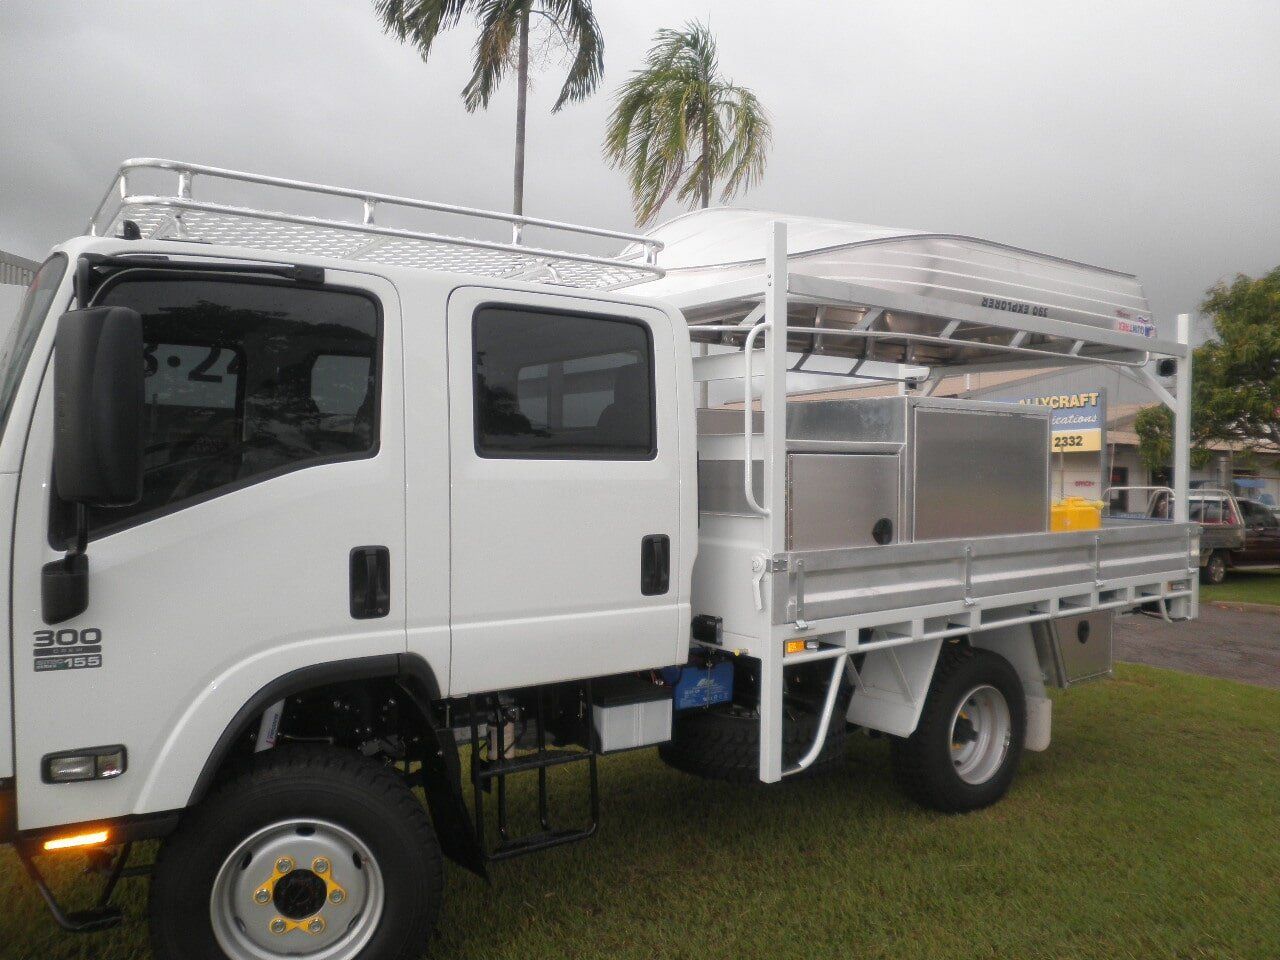 Mick Delta reef — Allycraft Modifications Aluminum Welding Fabrication Canopy in Winellie, NT